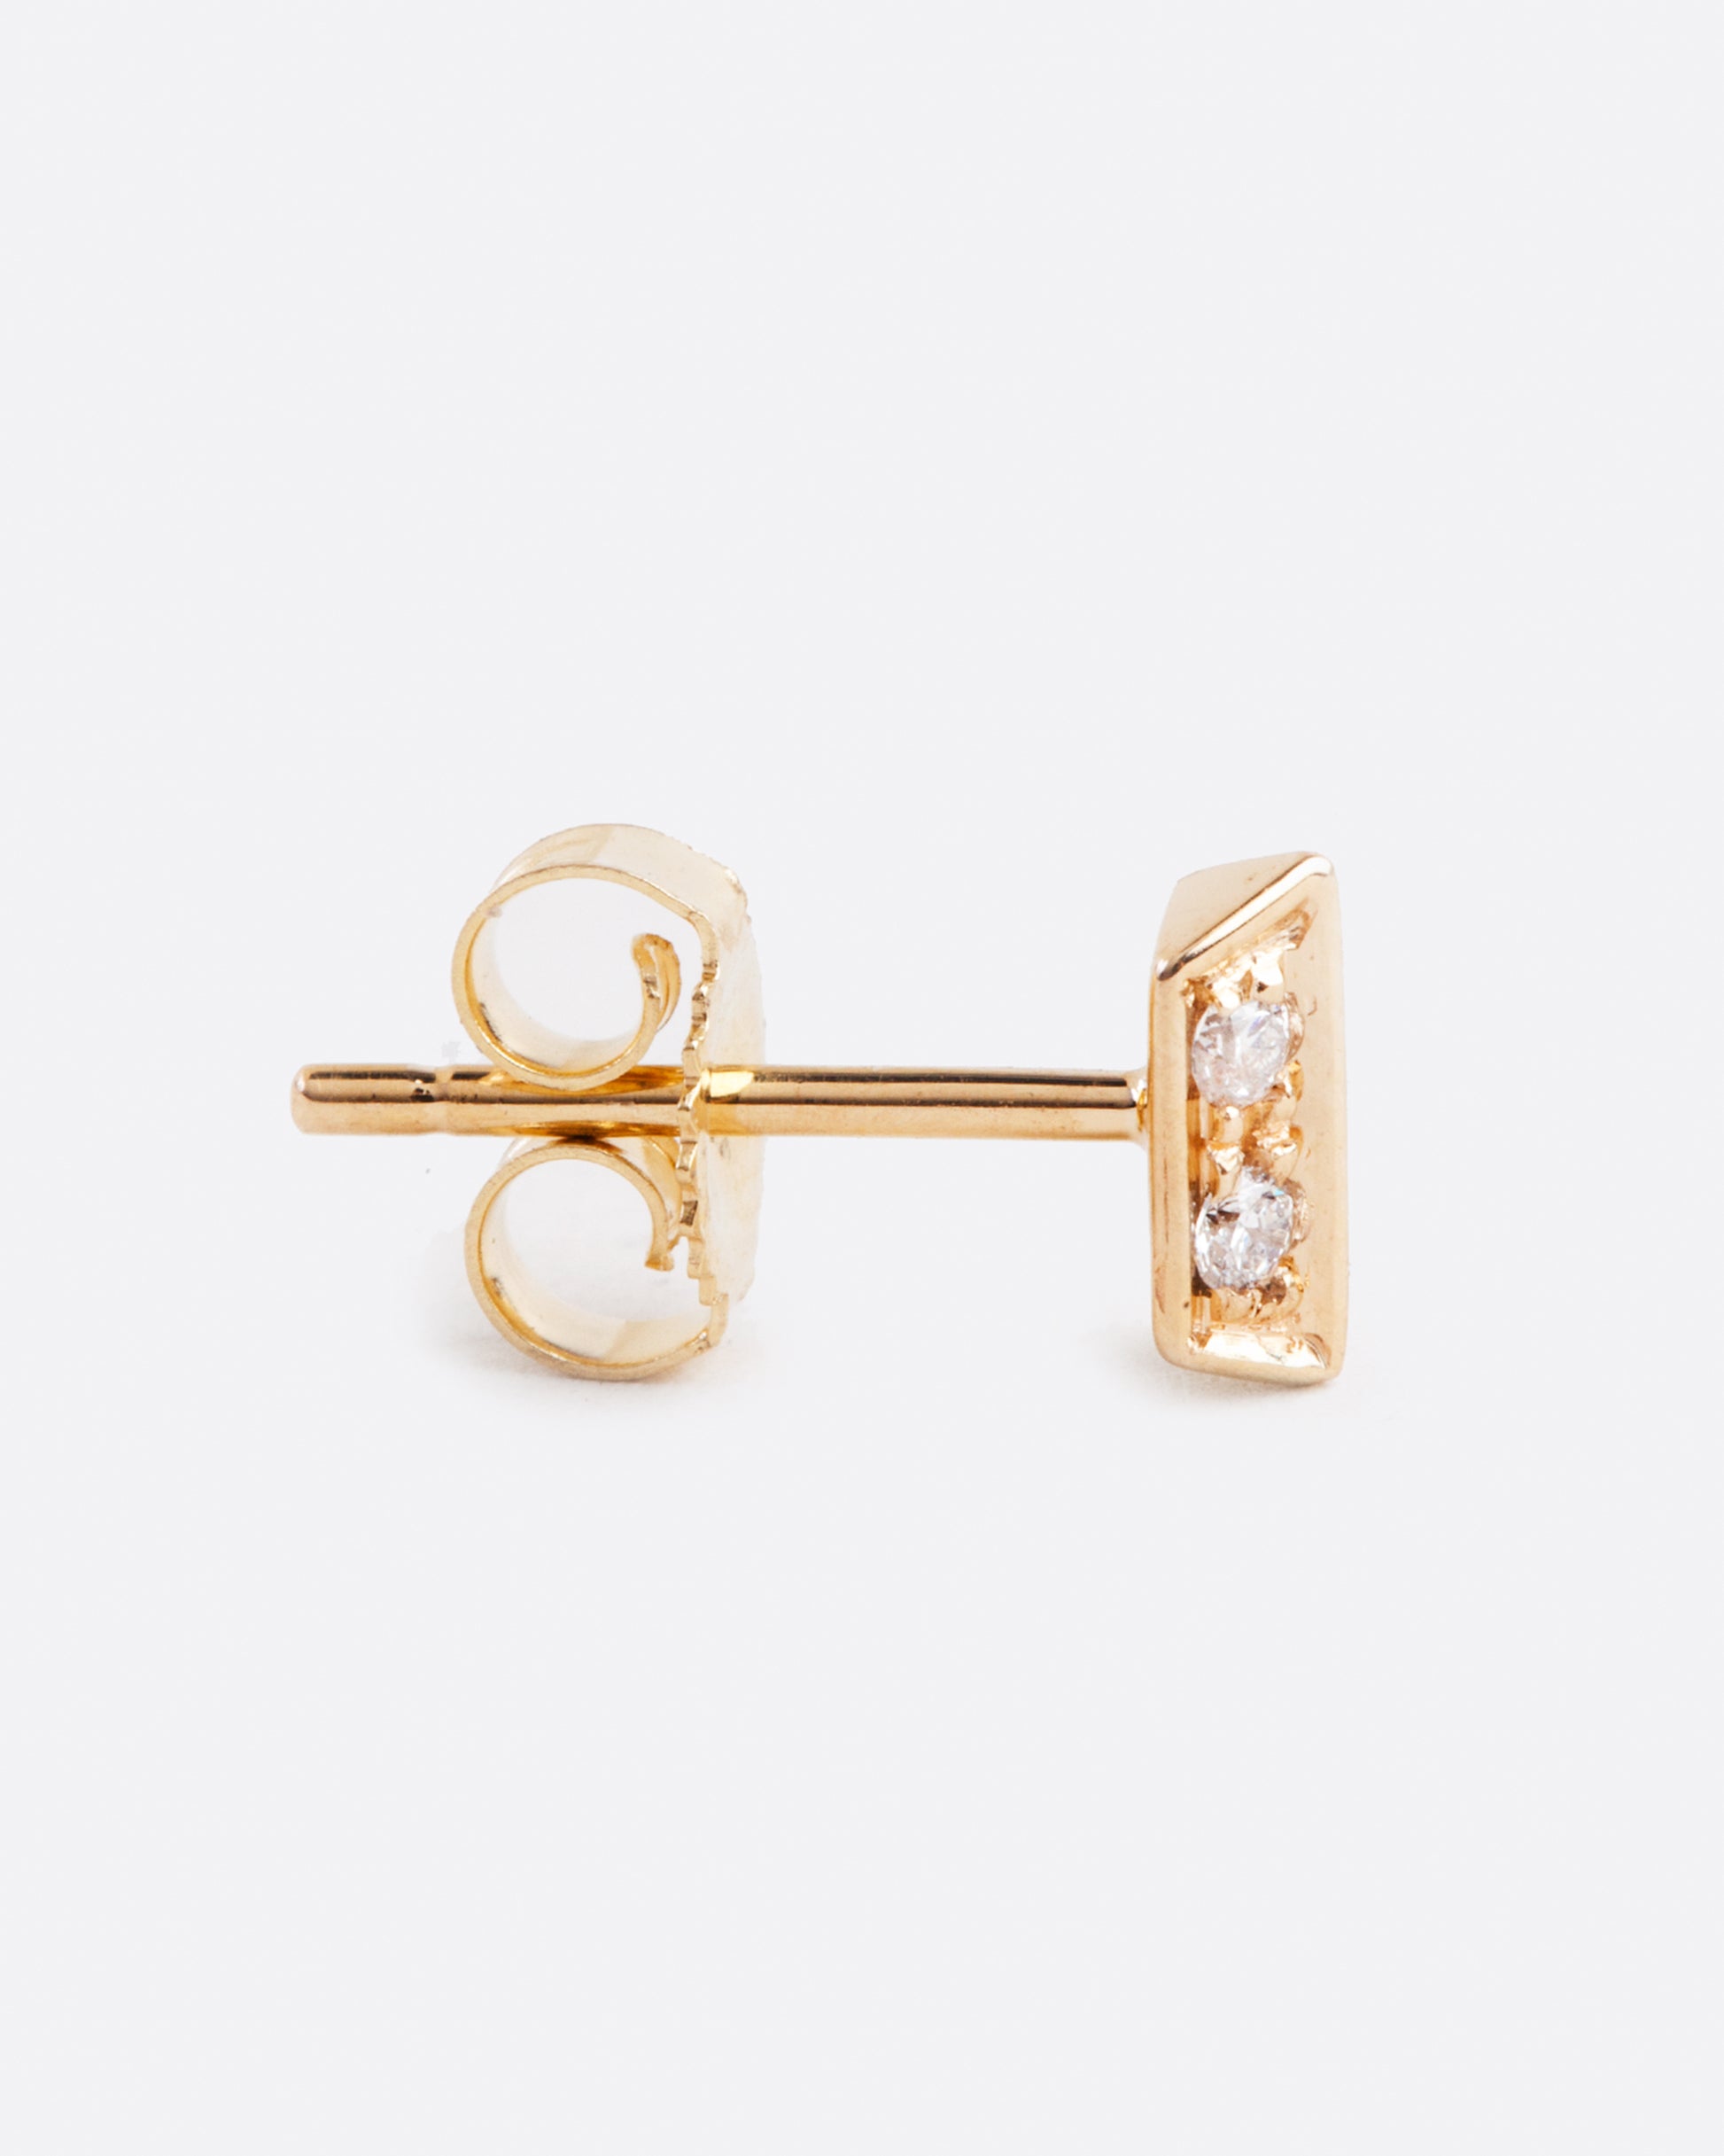 14k yellow gold angled bar stud earring with diamonds by Selin Kent, shown from the side.